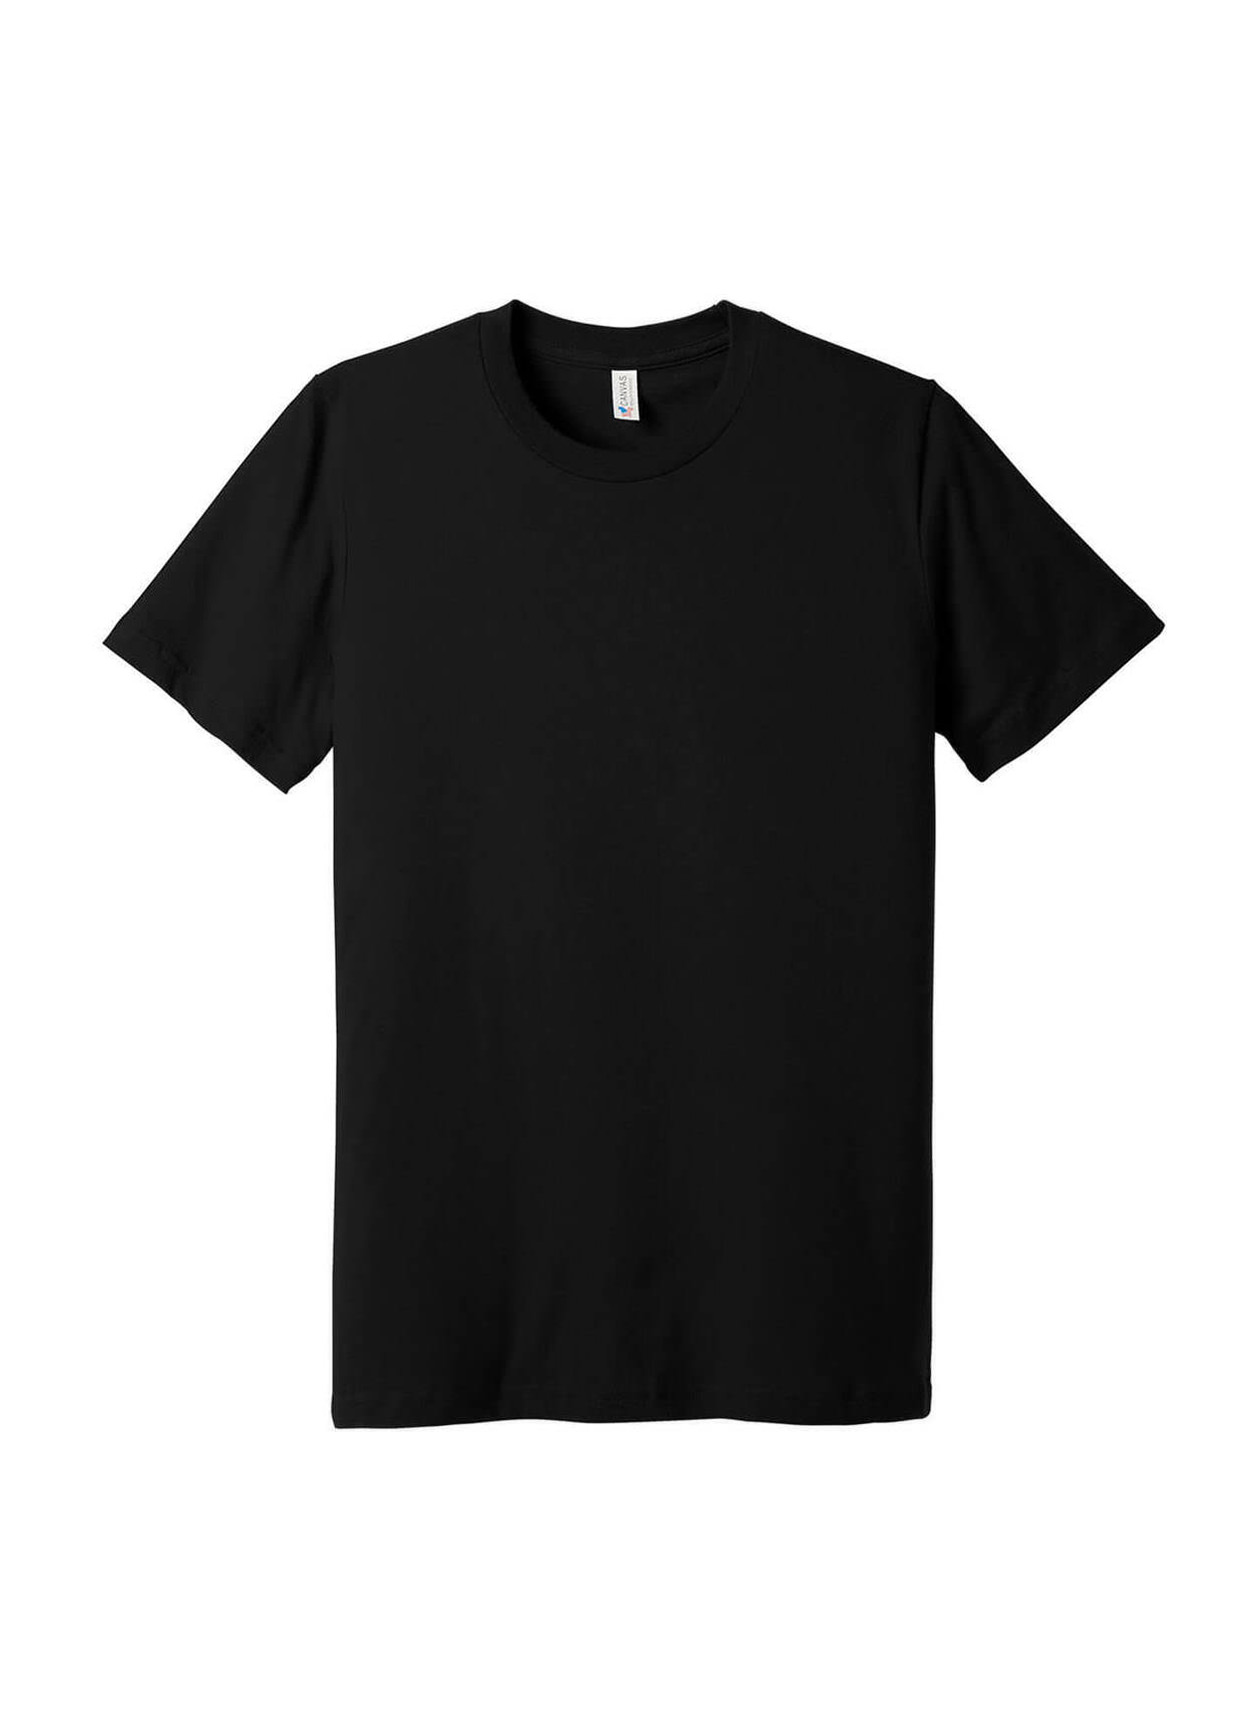 Bella + Canvas Men's Black Made In The USA Jersey T-Shirt